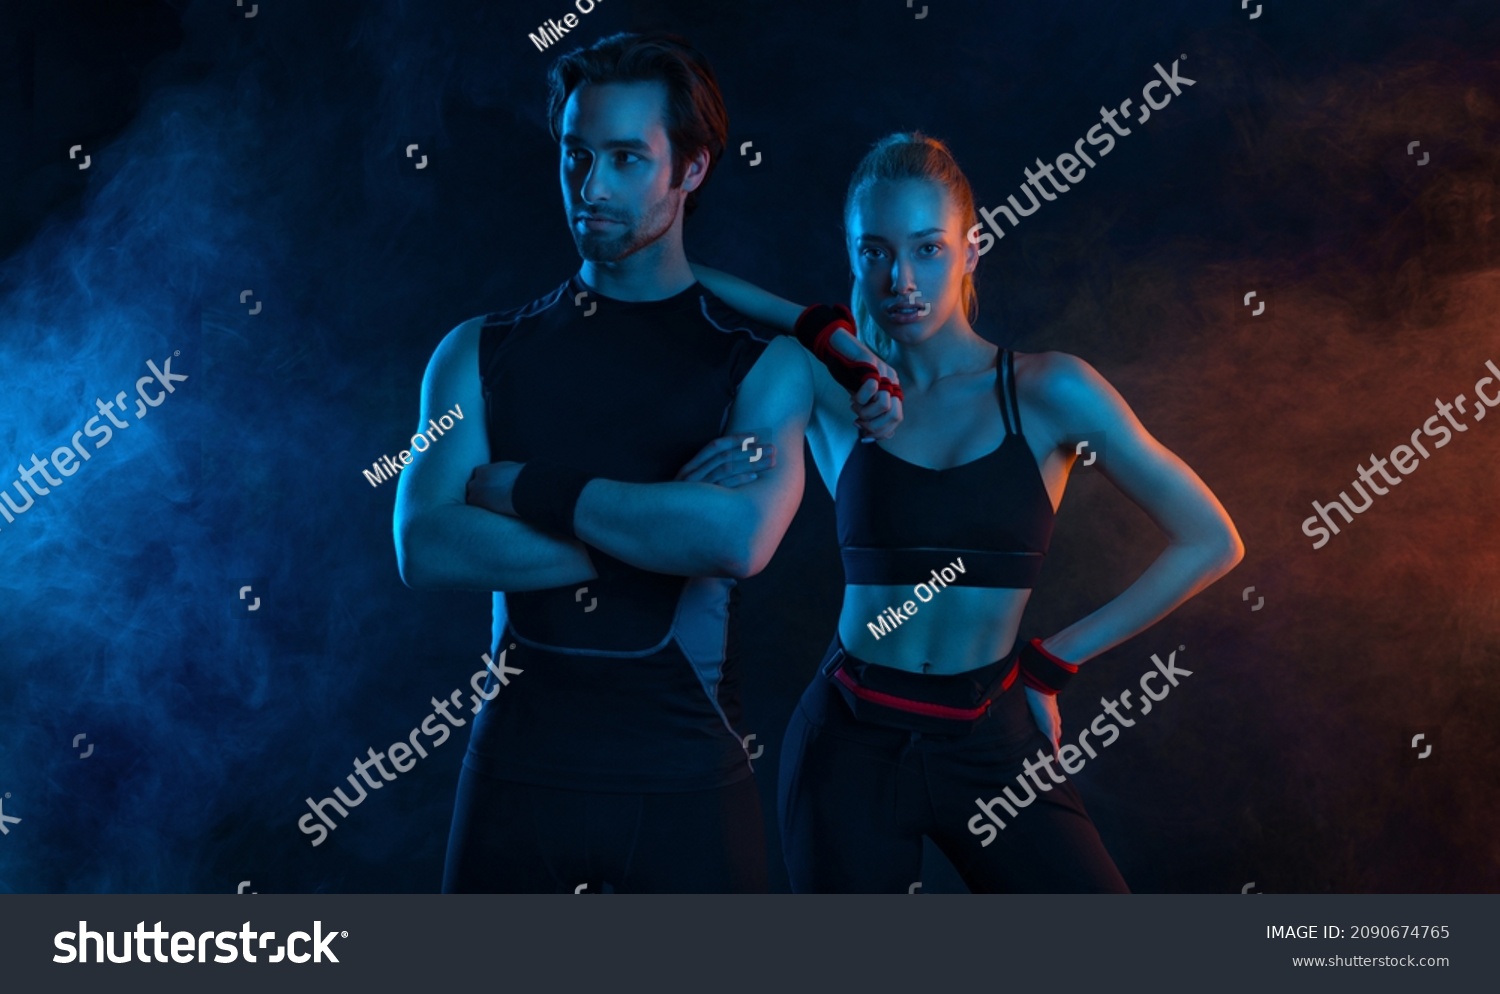 Sprinter run. Strong athletic woman and man running on black background wearing in the sportswear. Fitness and sport motivation. Runner concept. #2090674765